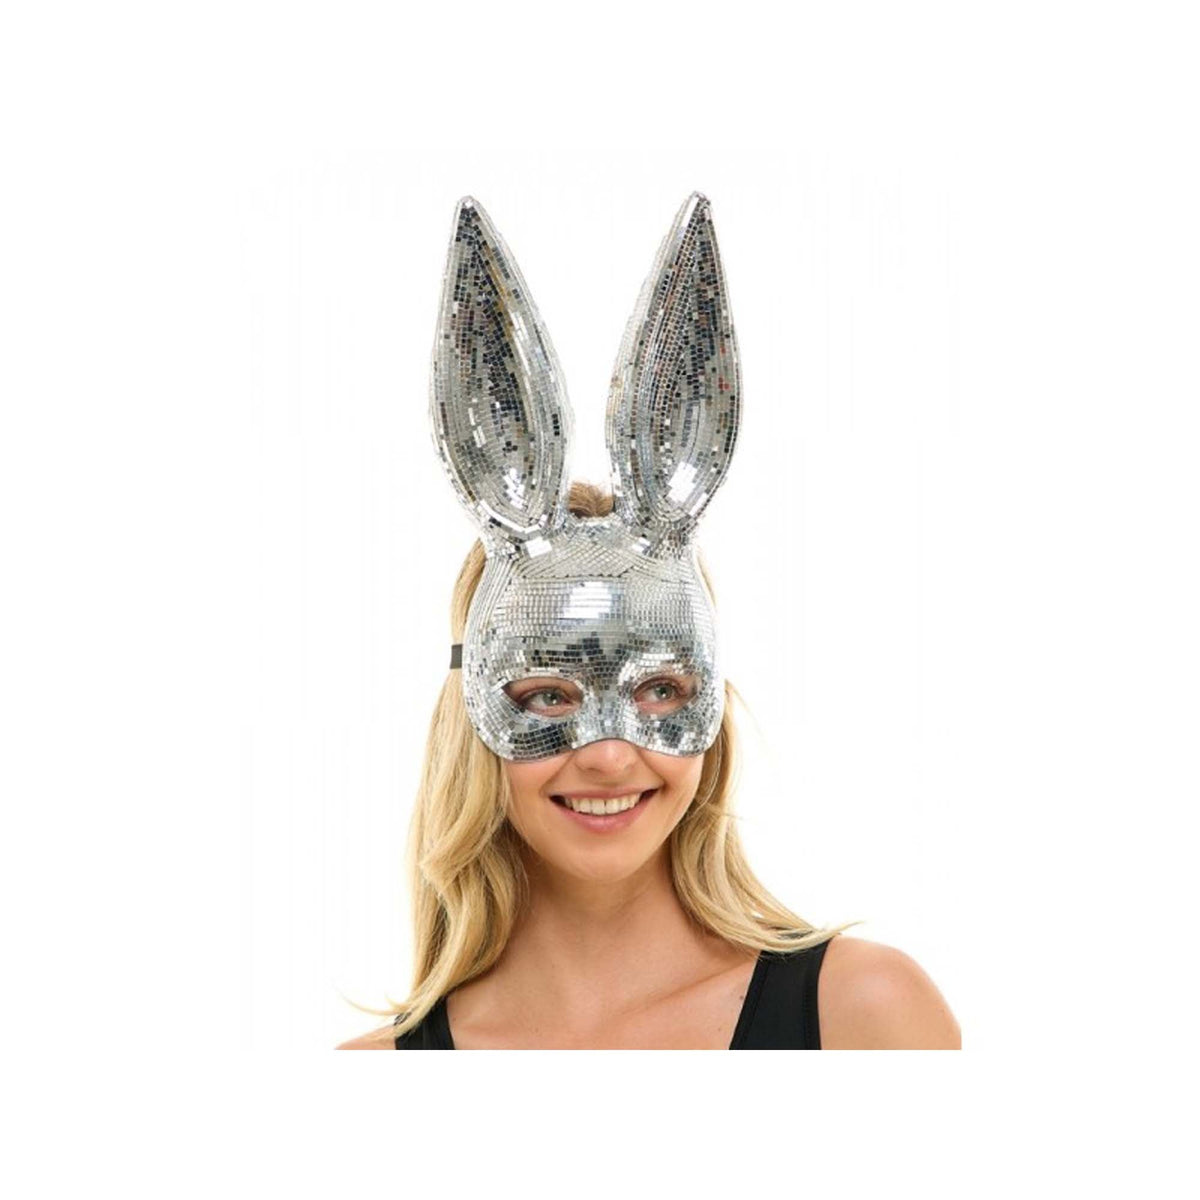 KBW GLOBAL CORP Costume Accessories Silver Mirror Bunny Mask for Adults 831687054044